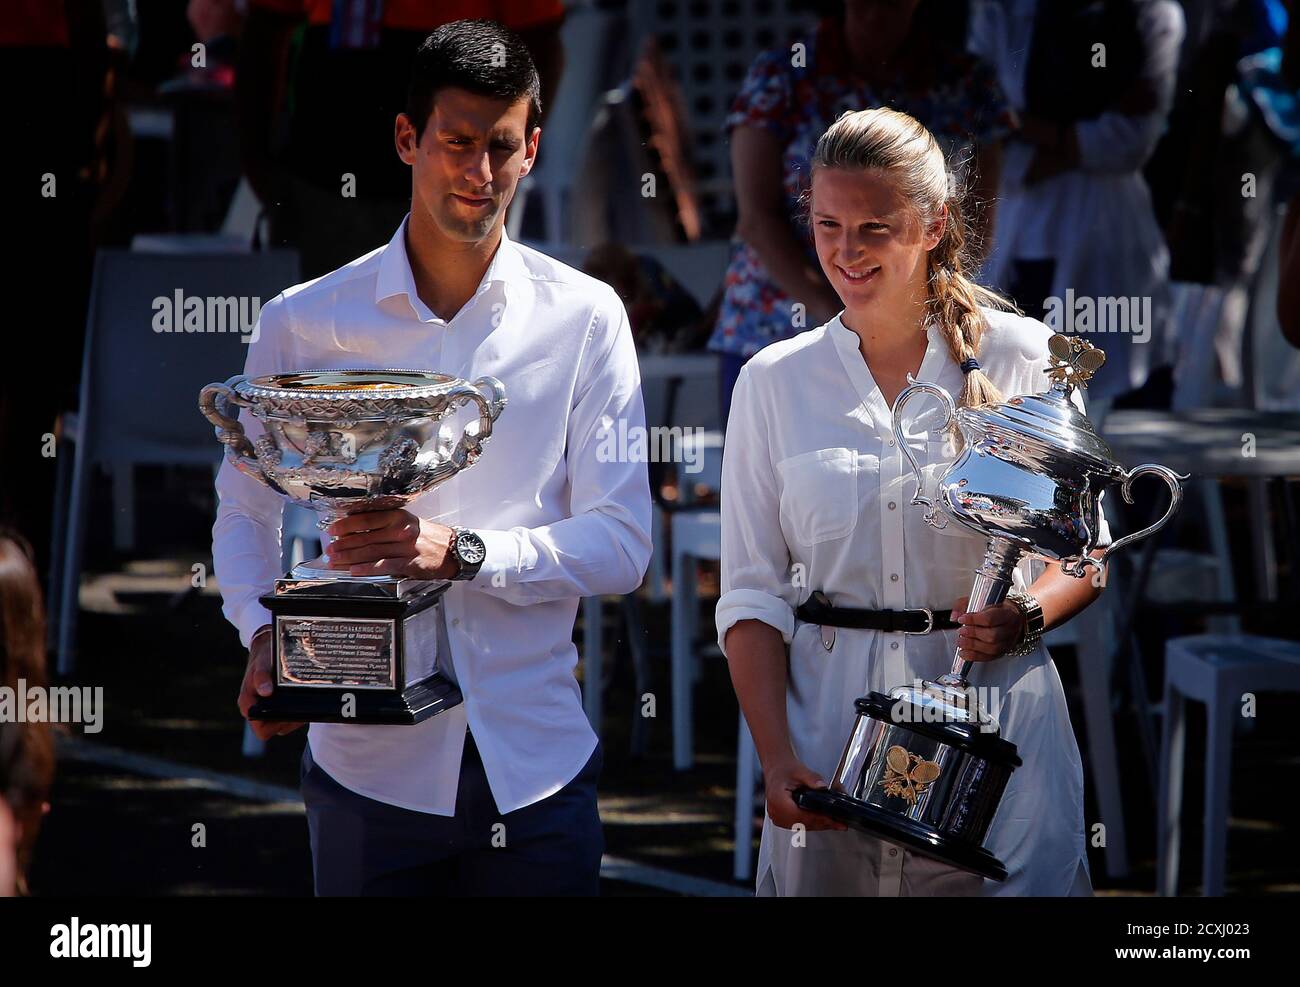 Current Australian Open tennis champions Serbia's Novak Djokovic (L) and Victoria Azarenka from Belarus walk with the championship trophies to the official draw ceremony Melbourne Park January 10, 2014. The Australian